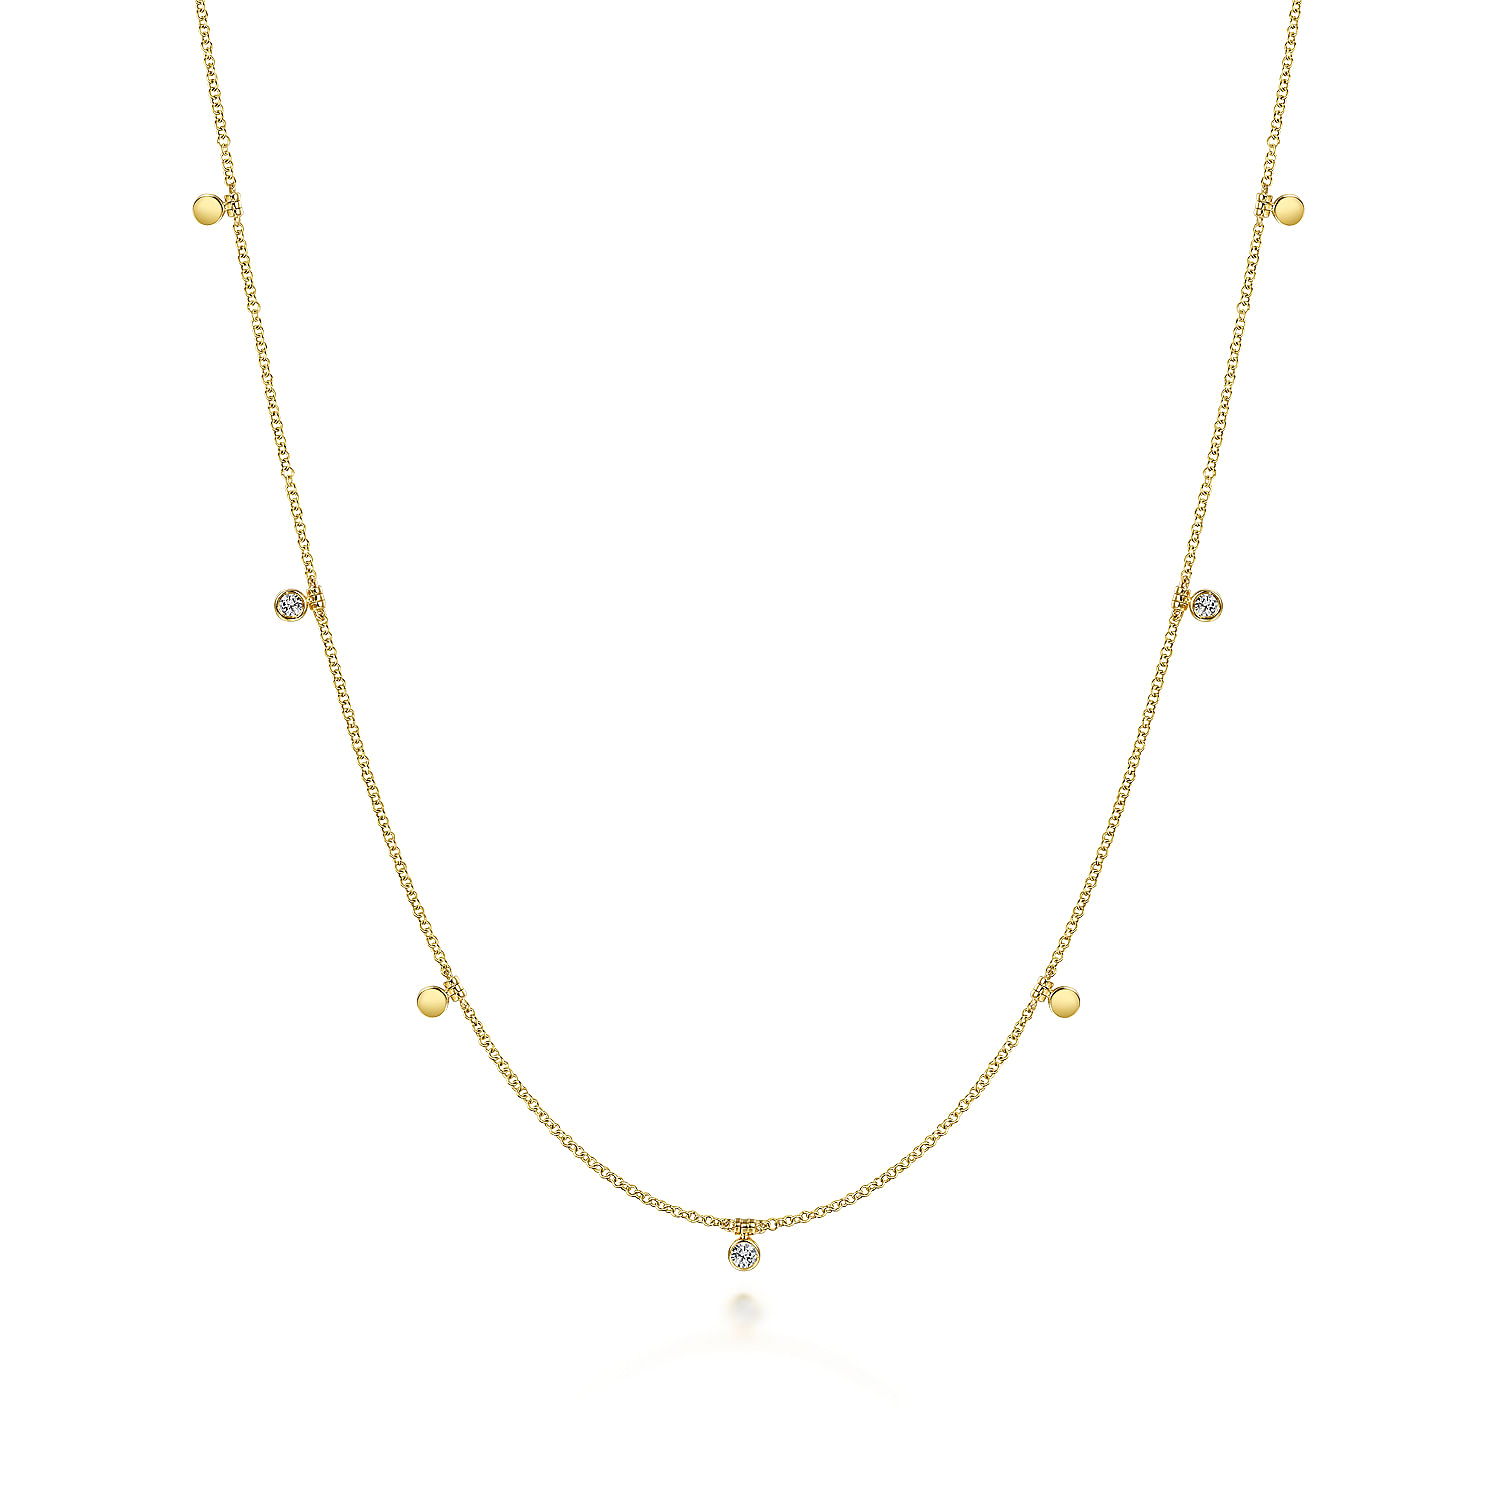 24 inch 14K Yellow Gold Diamond and Disc Station Necklace